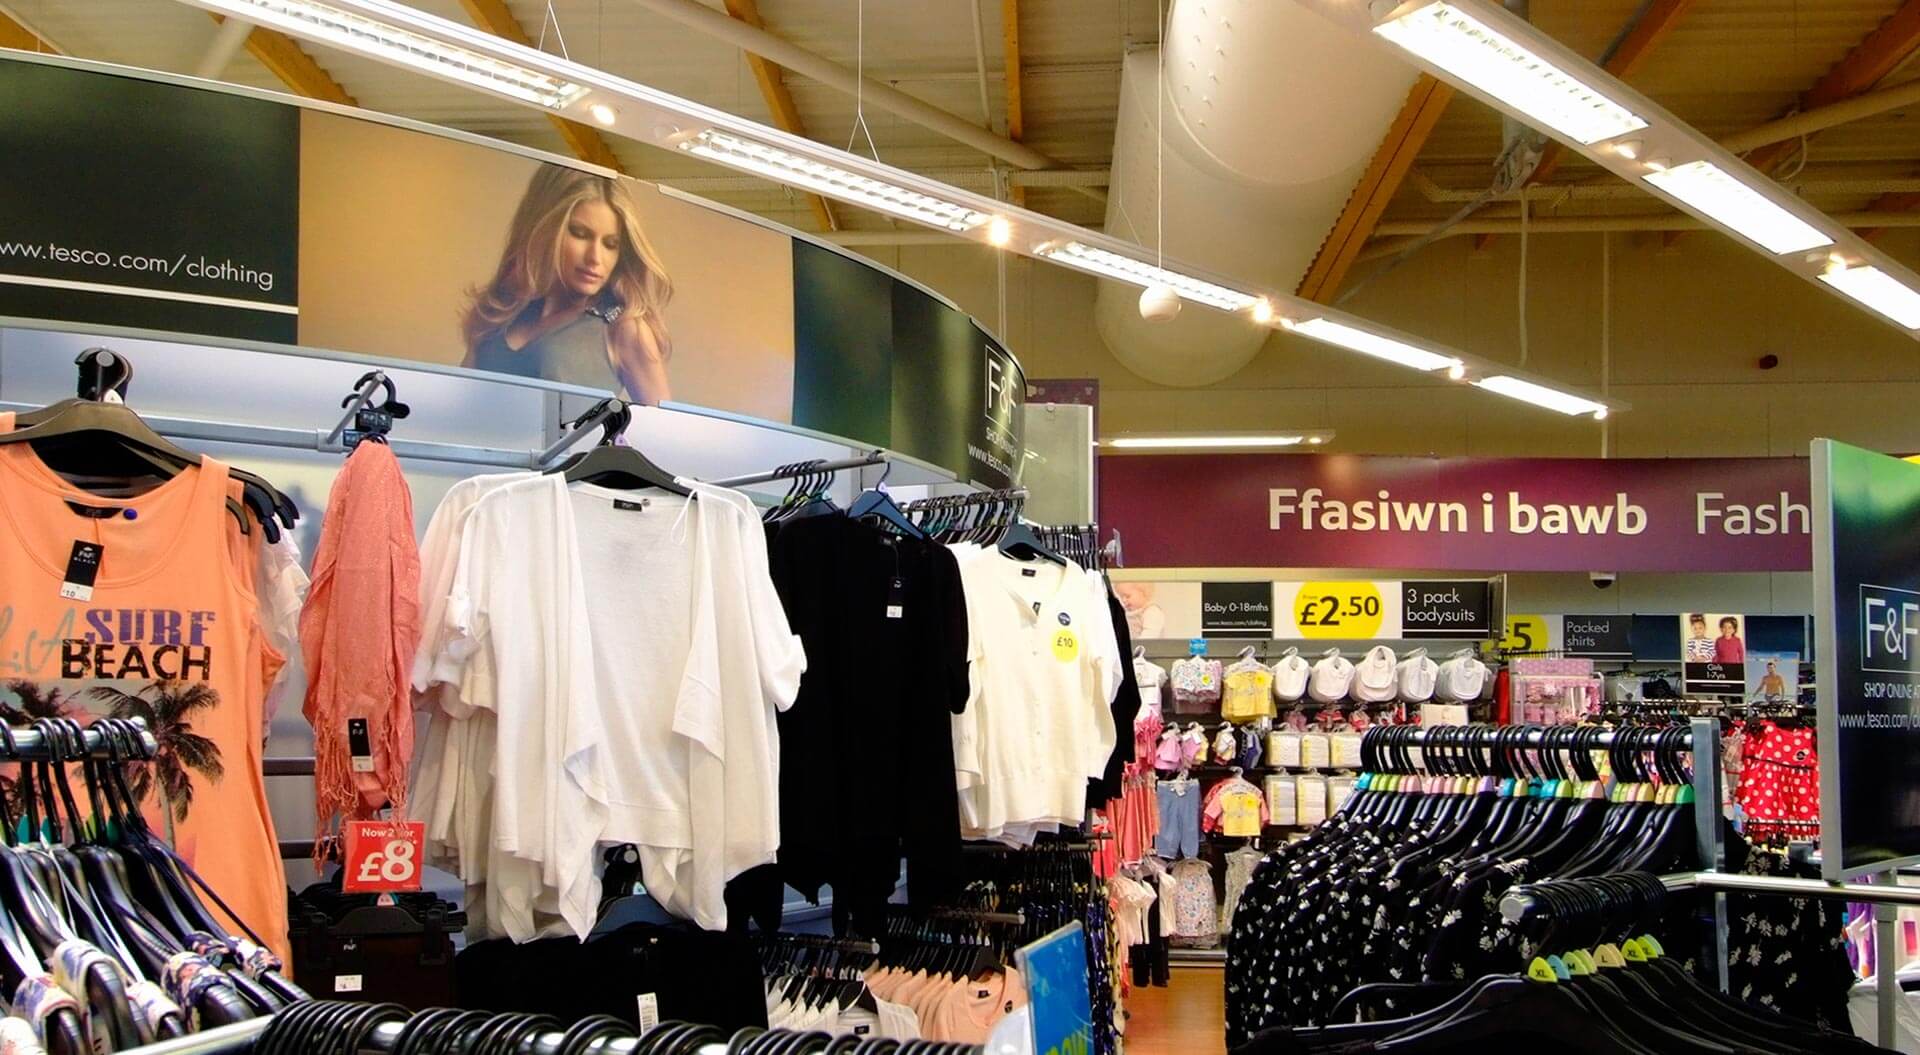  Florence and Fred Tesco fashion best retail store interior design, rebrand, new trends, ideas